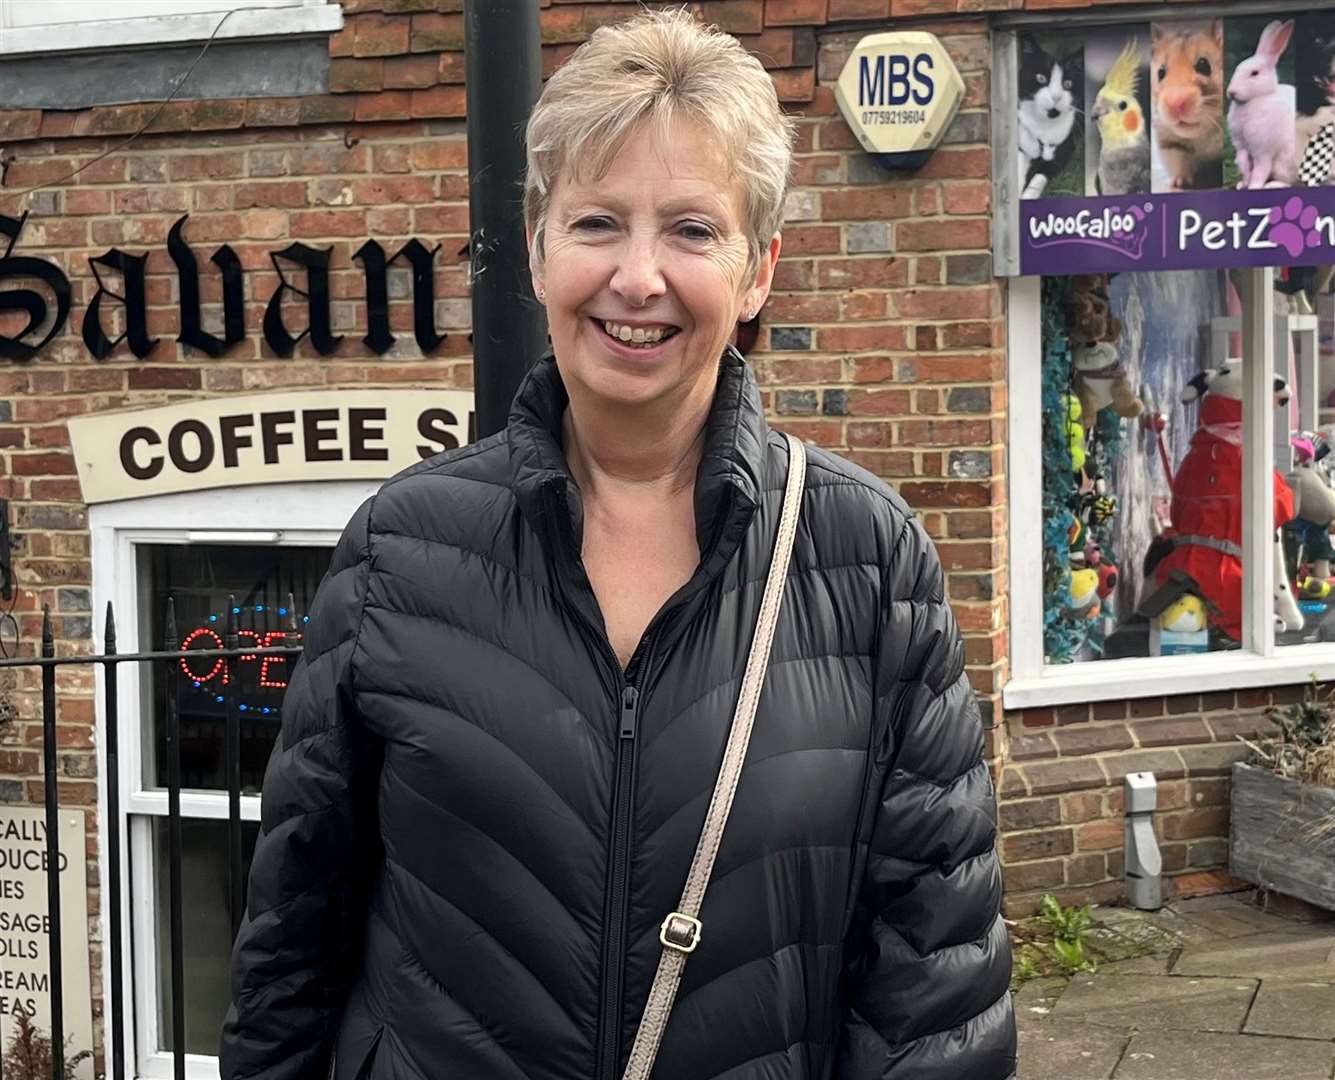 Deborah Theobald, 64, has worked in Tenterden for 30 years and wants to see less empty shop fronts on the High Street